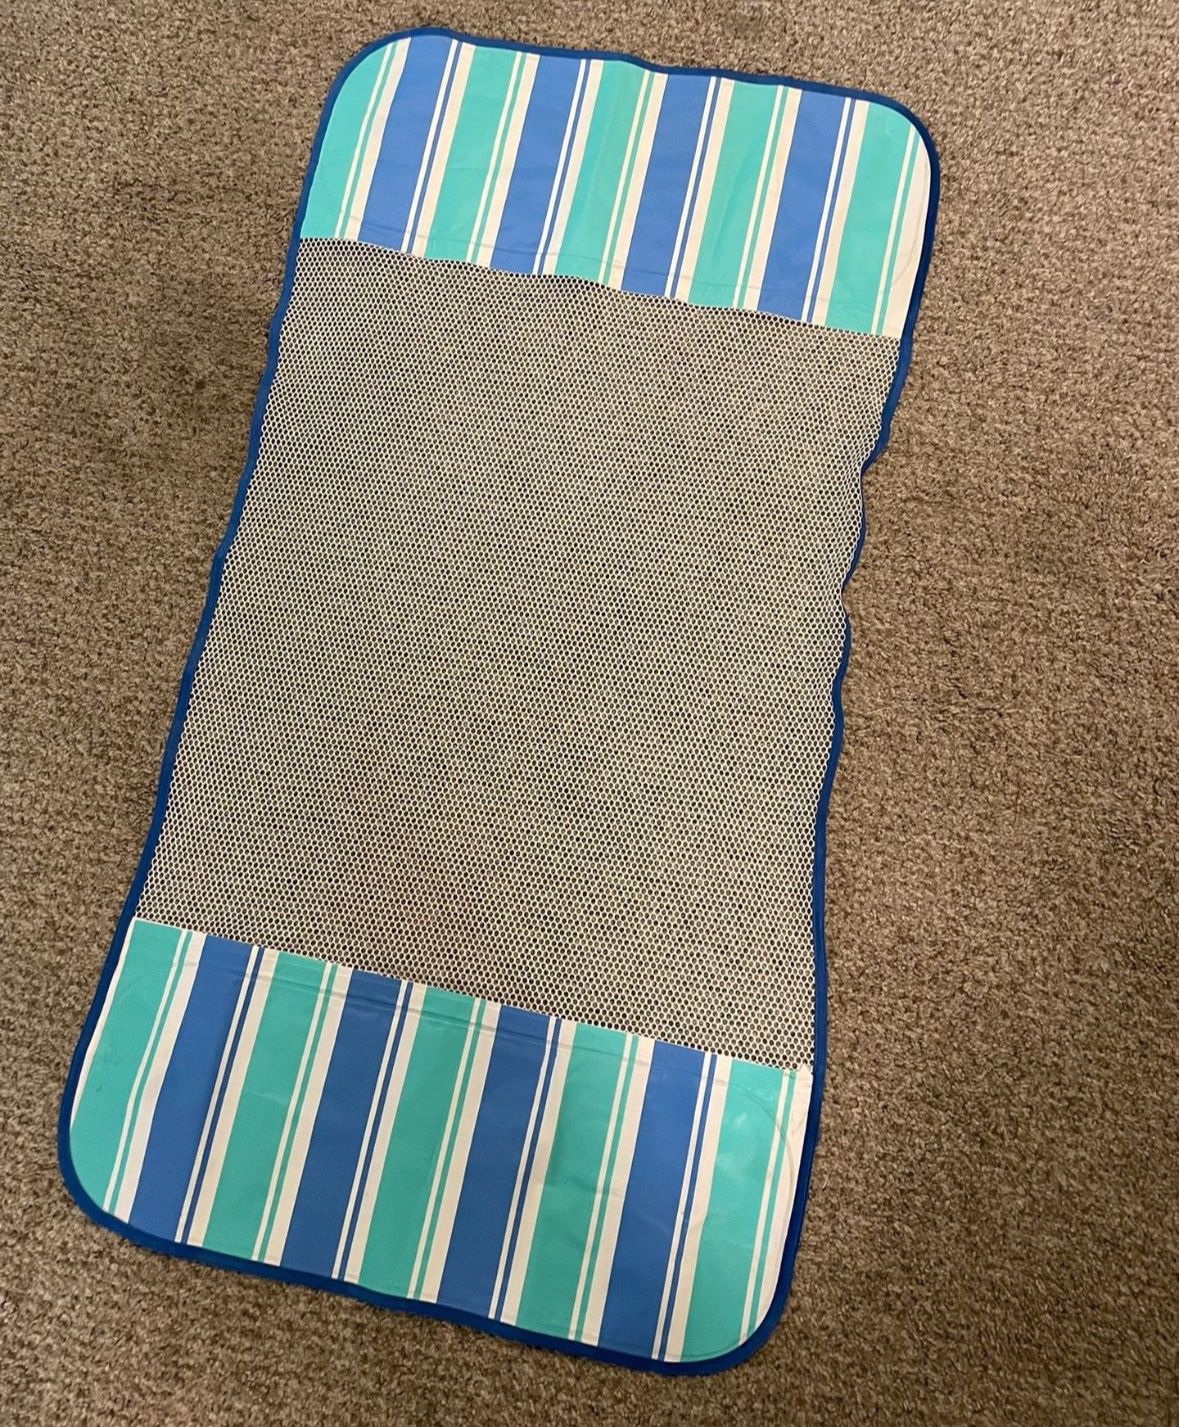 Blue and Turquoise Striped Hammock Pool Float. Used Once. Travel 